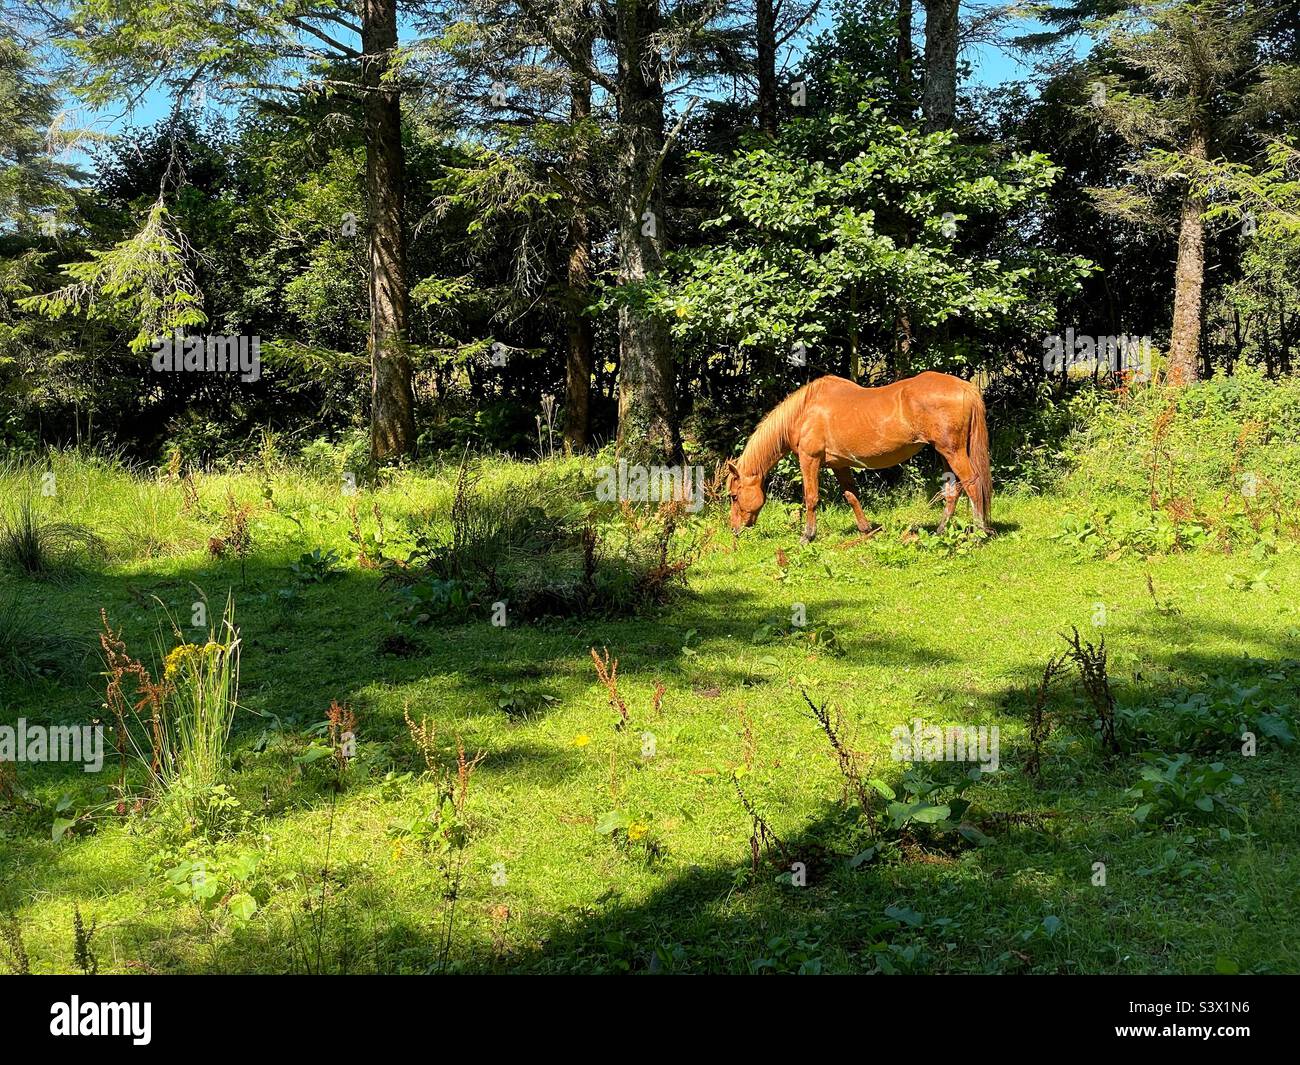 Chestnut horse grazing in a field surrounded by woodland. Stock Photo